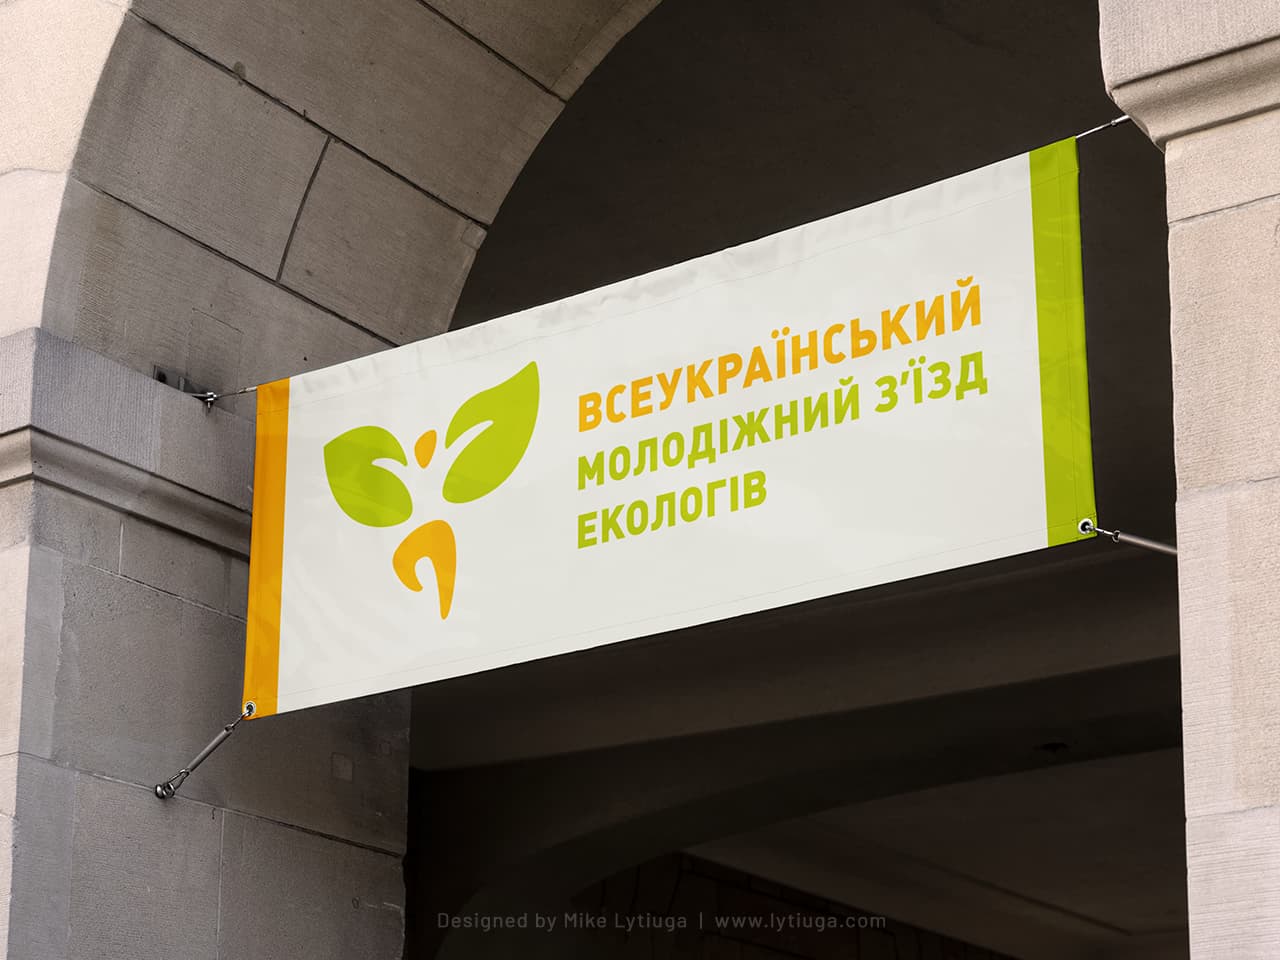 Ecology conference logo design - vynil banners for all-Ukrainian conference of young ecologists